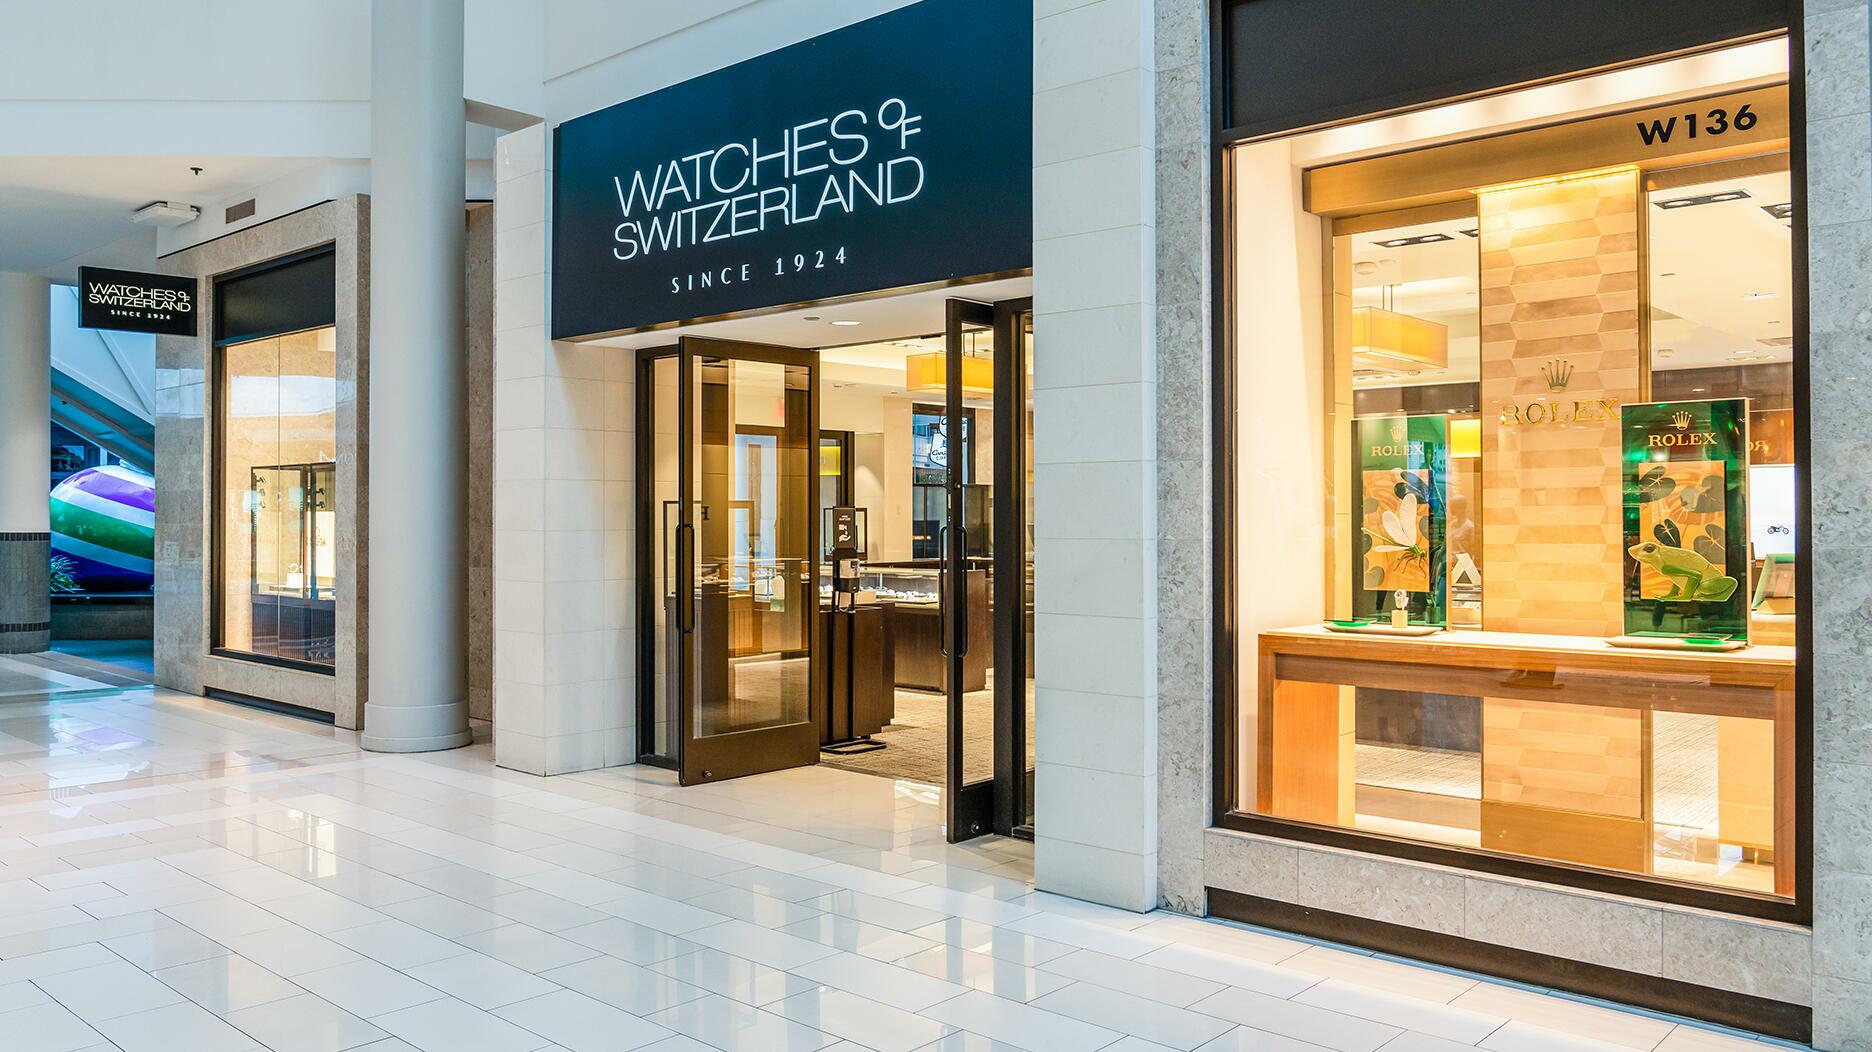 Watches of Switzerland store in the Mall of America